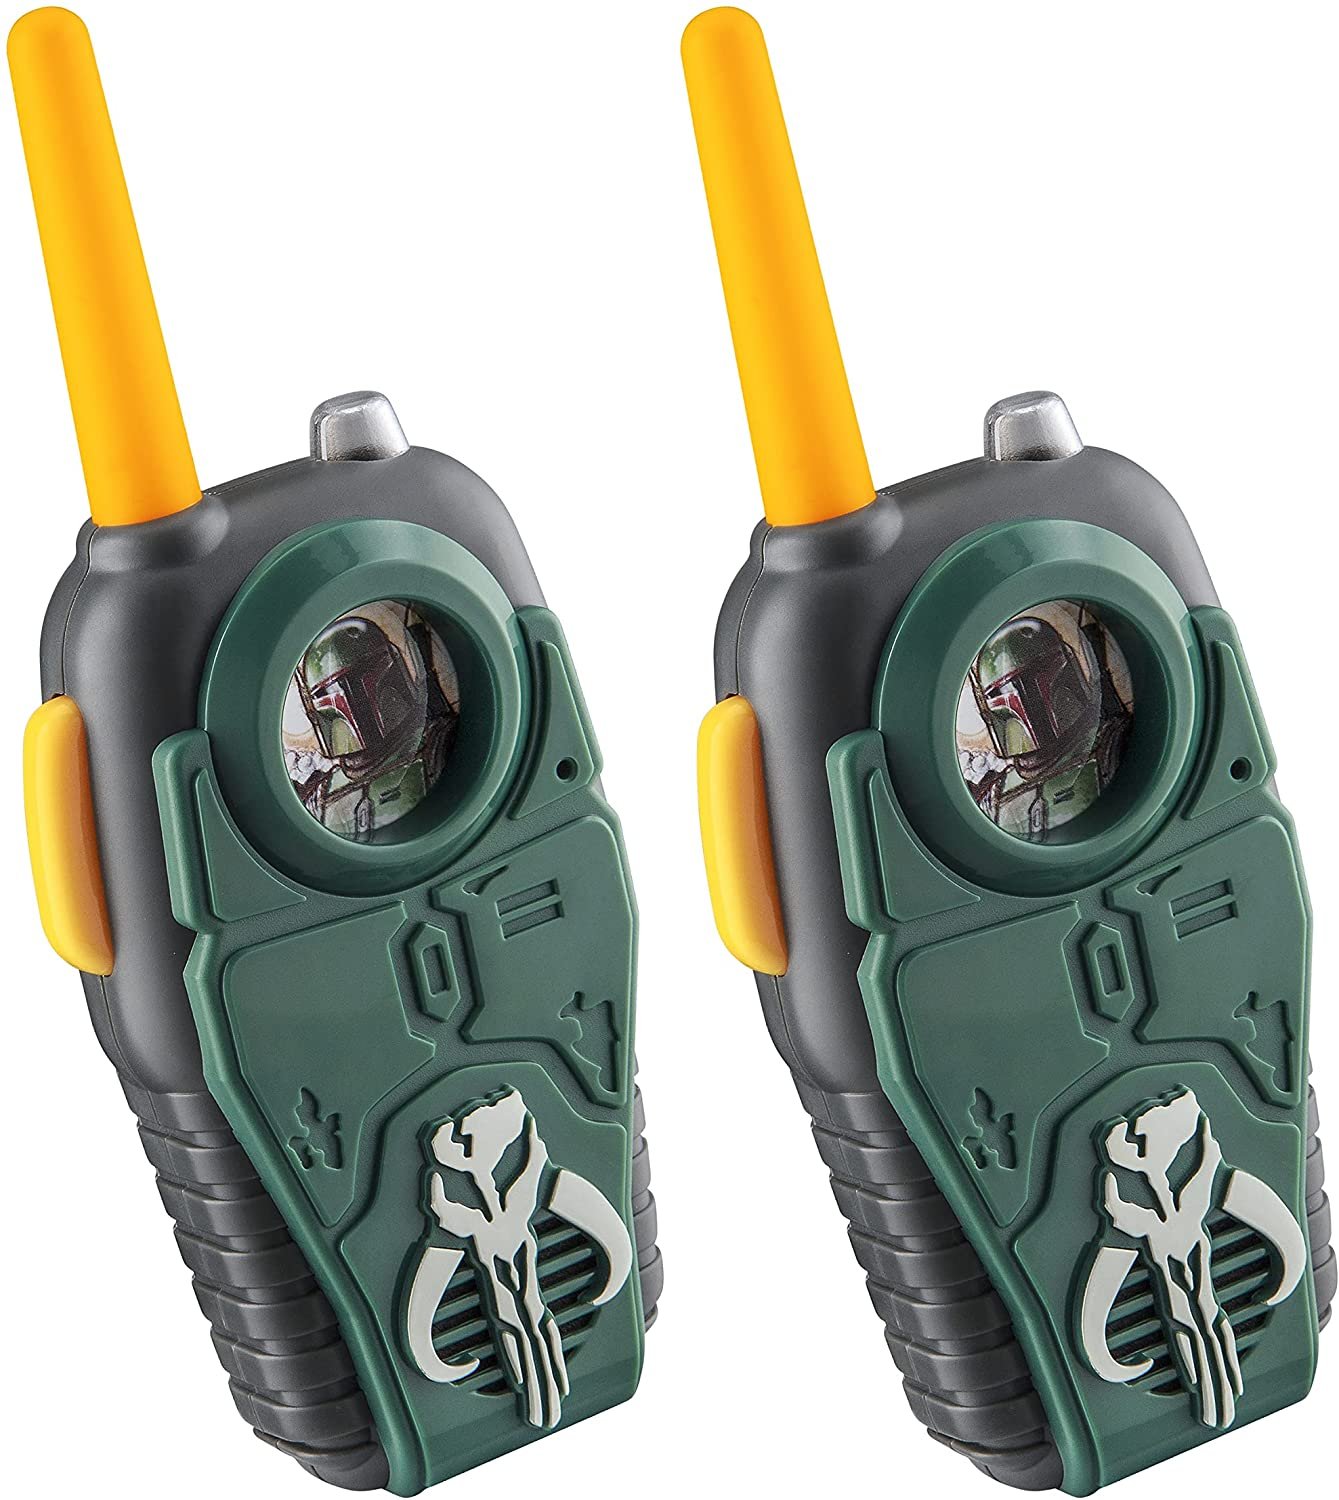 ekids The Book of Boba Fett Toy Walkie Talkies for Kids, Two Way Radios for Indoor and Outdoor Games - image 4 of 7